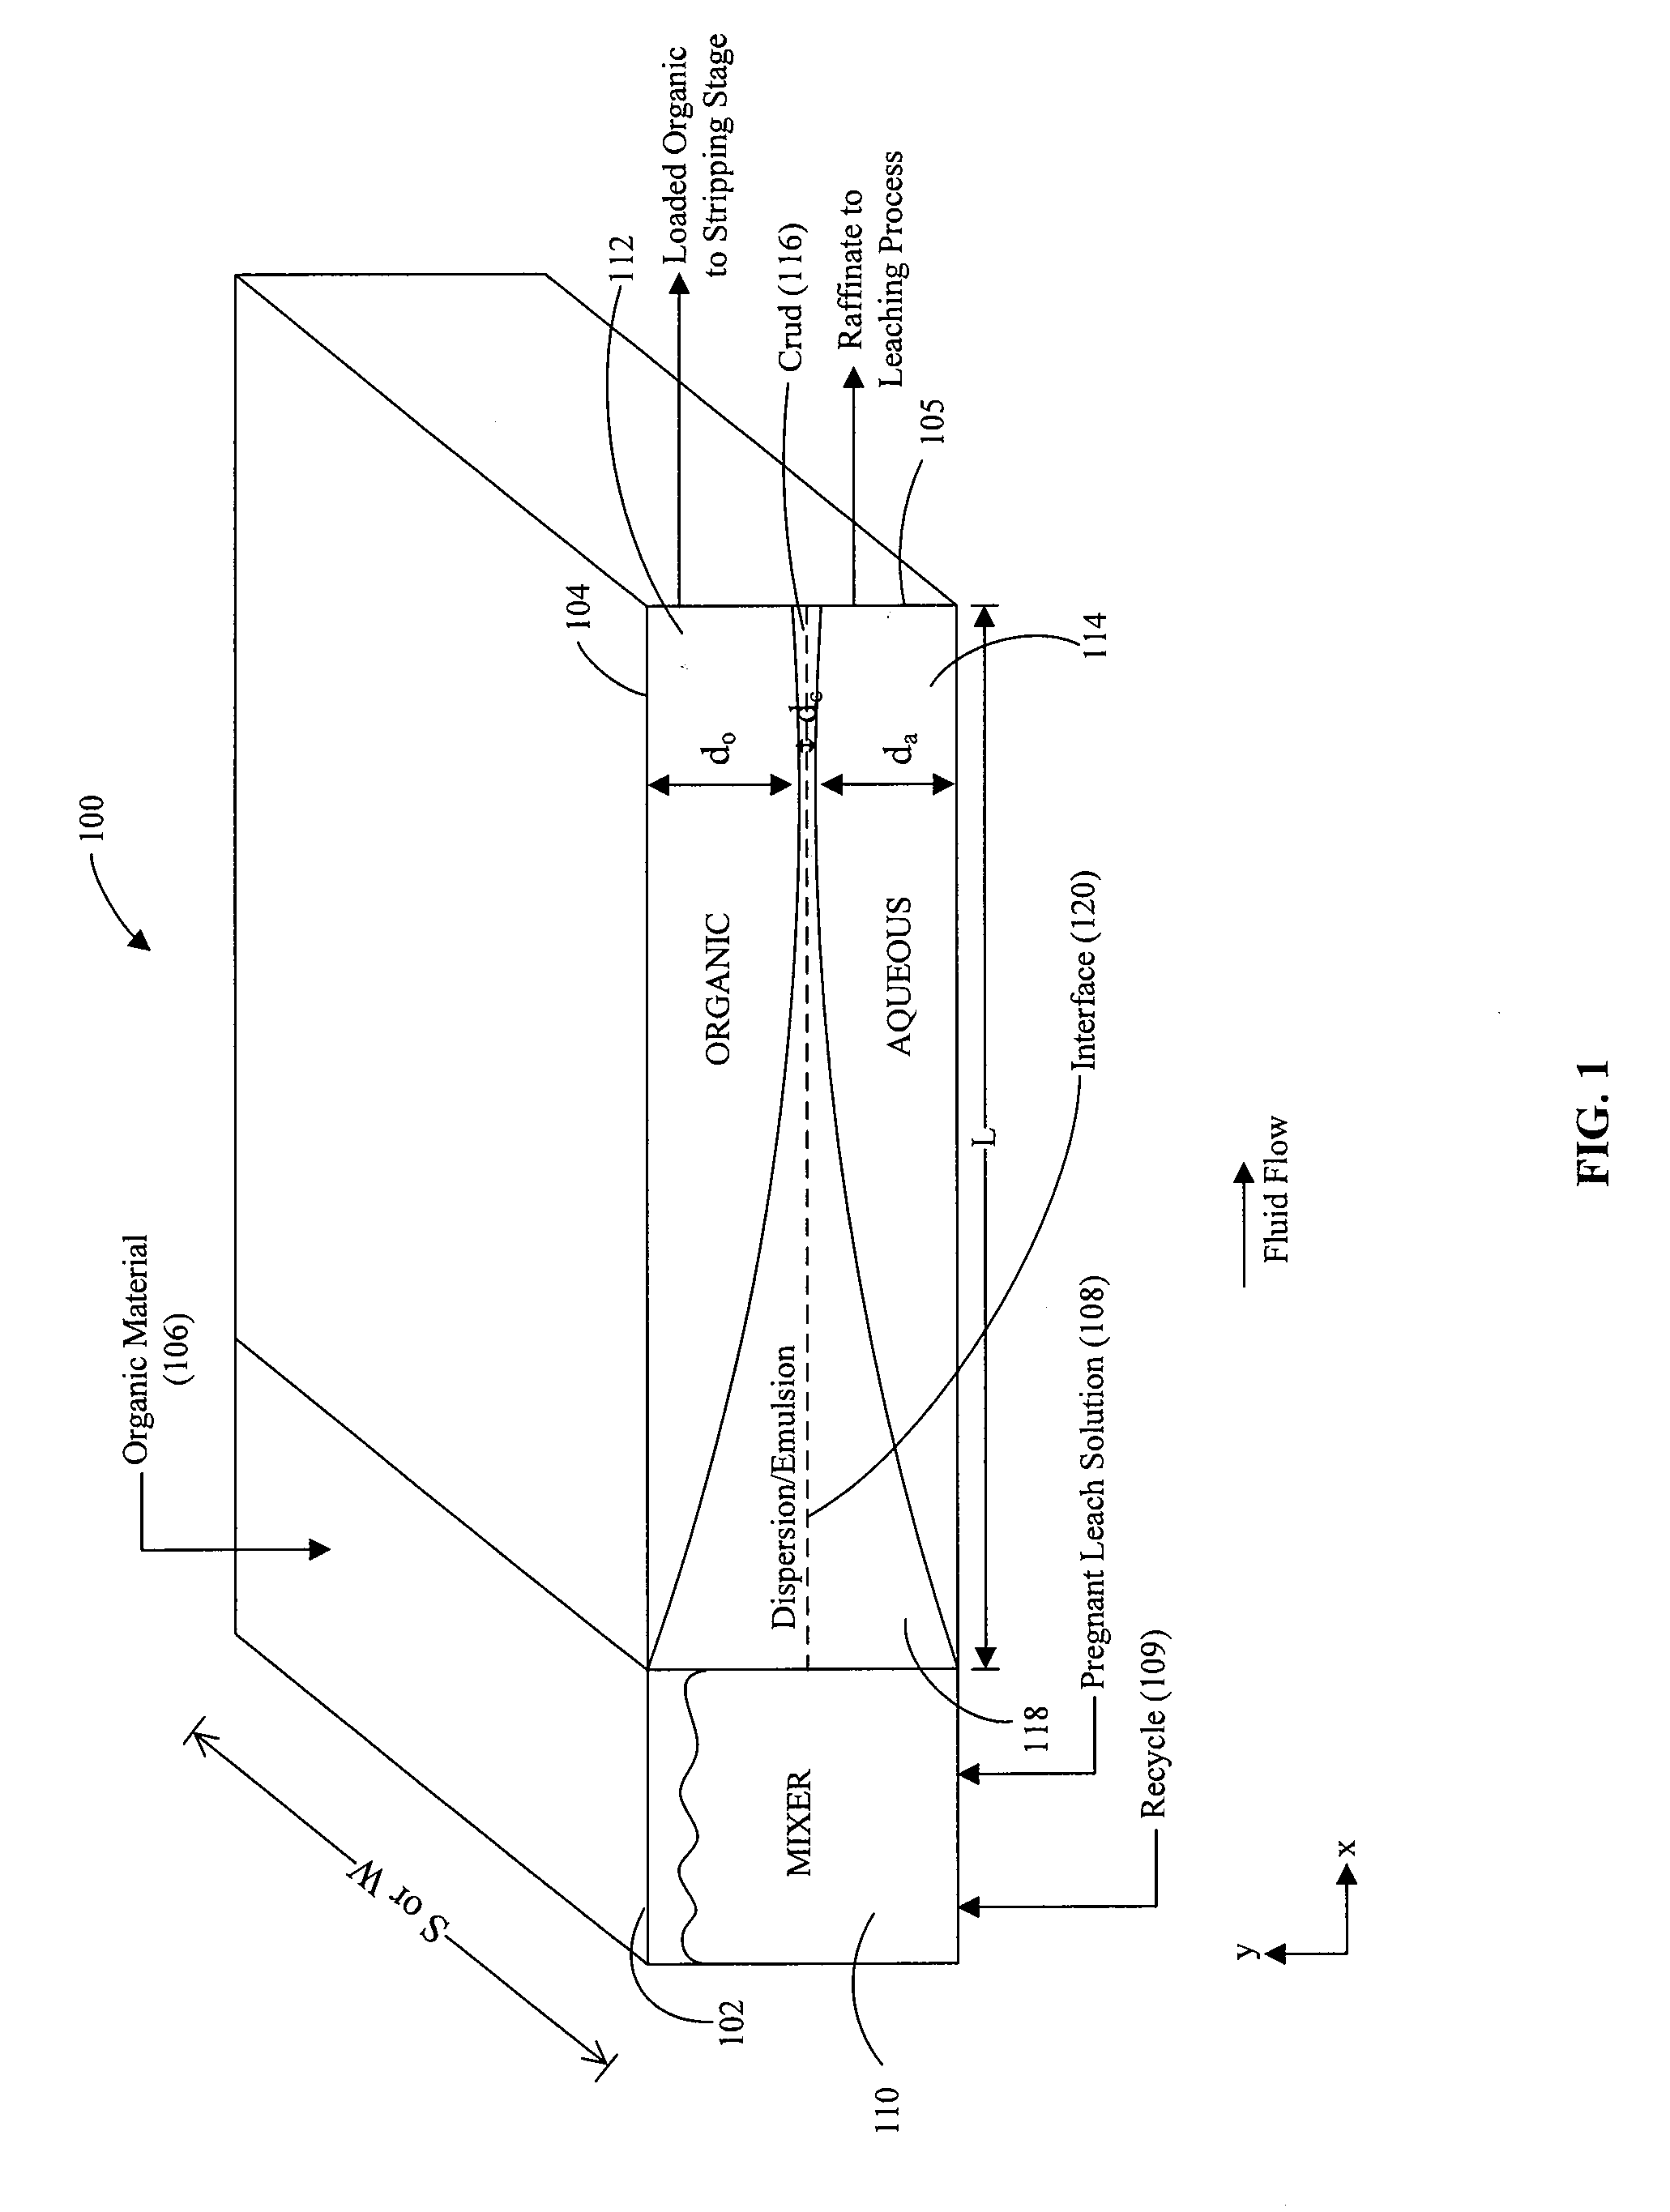 Method and article of manufacture for solvent extraction operation